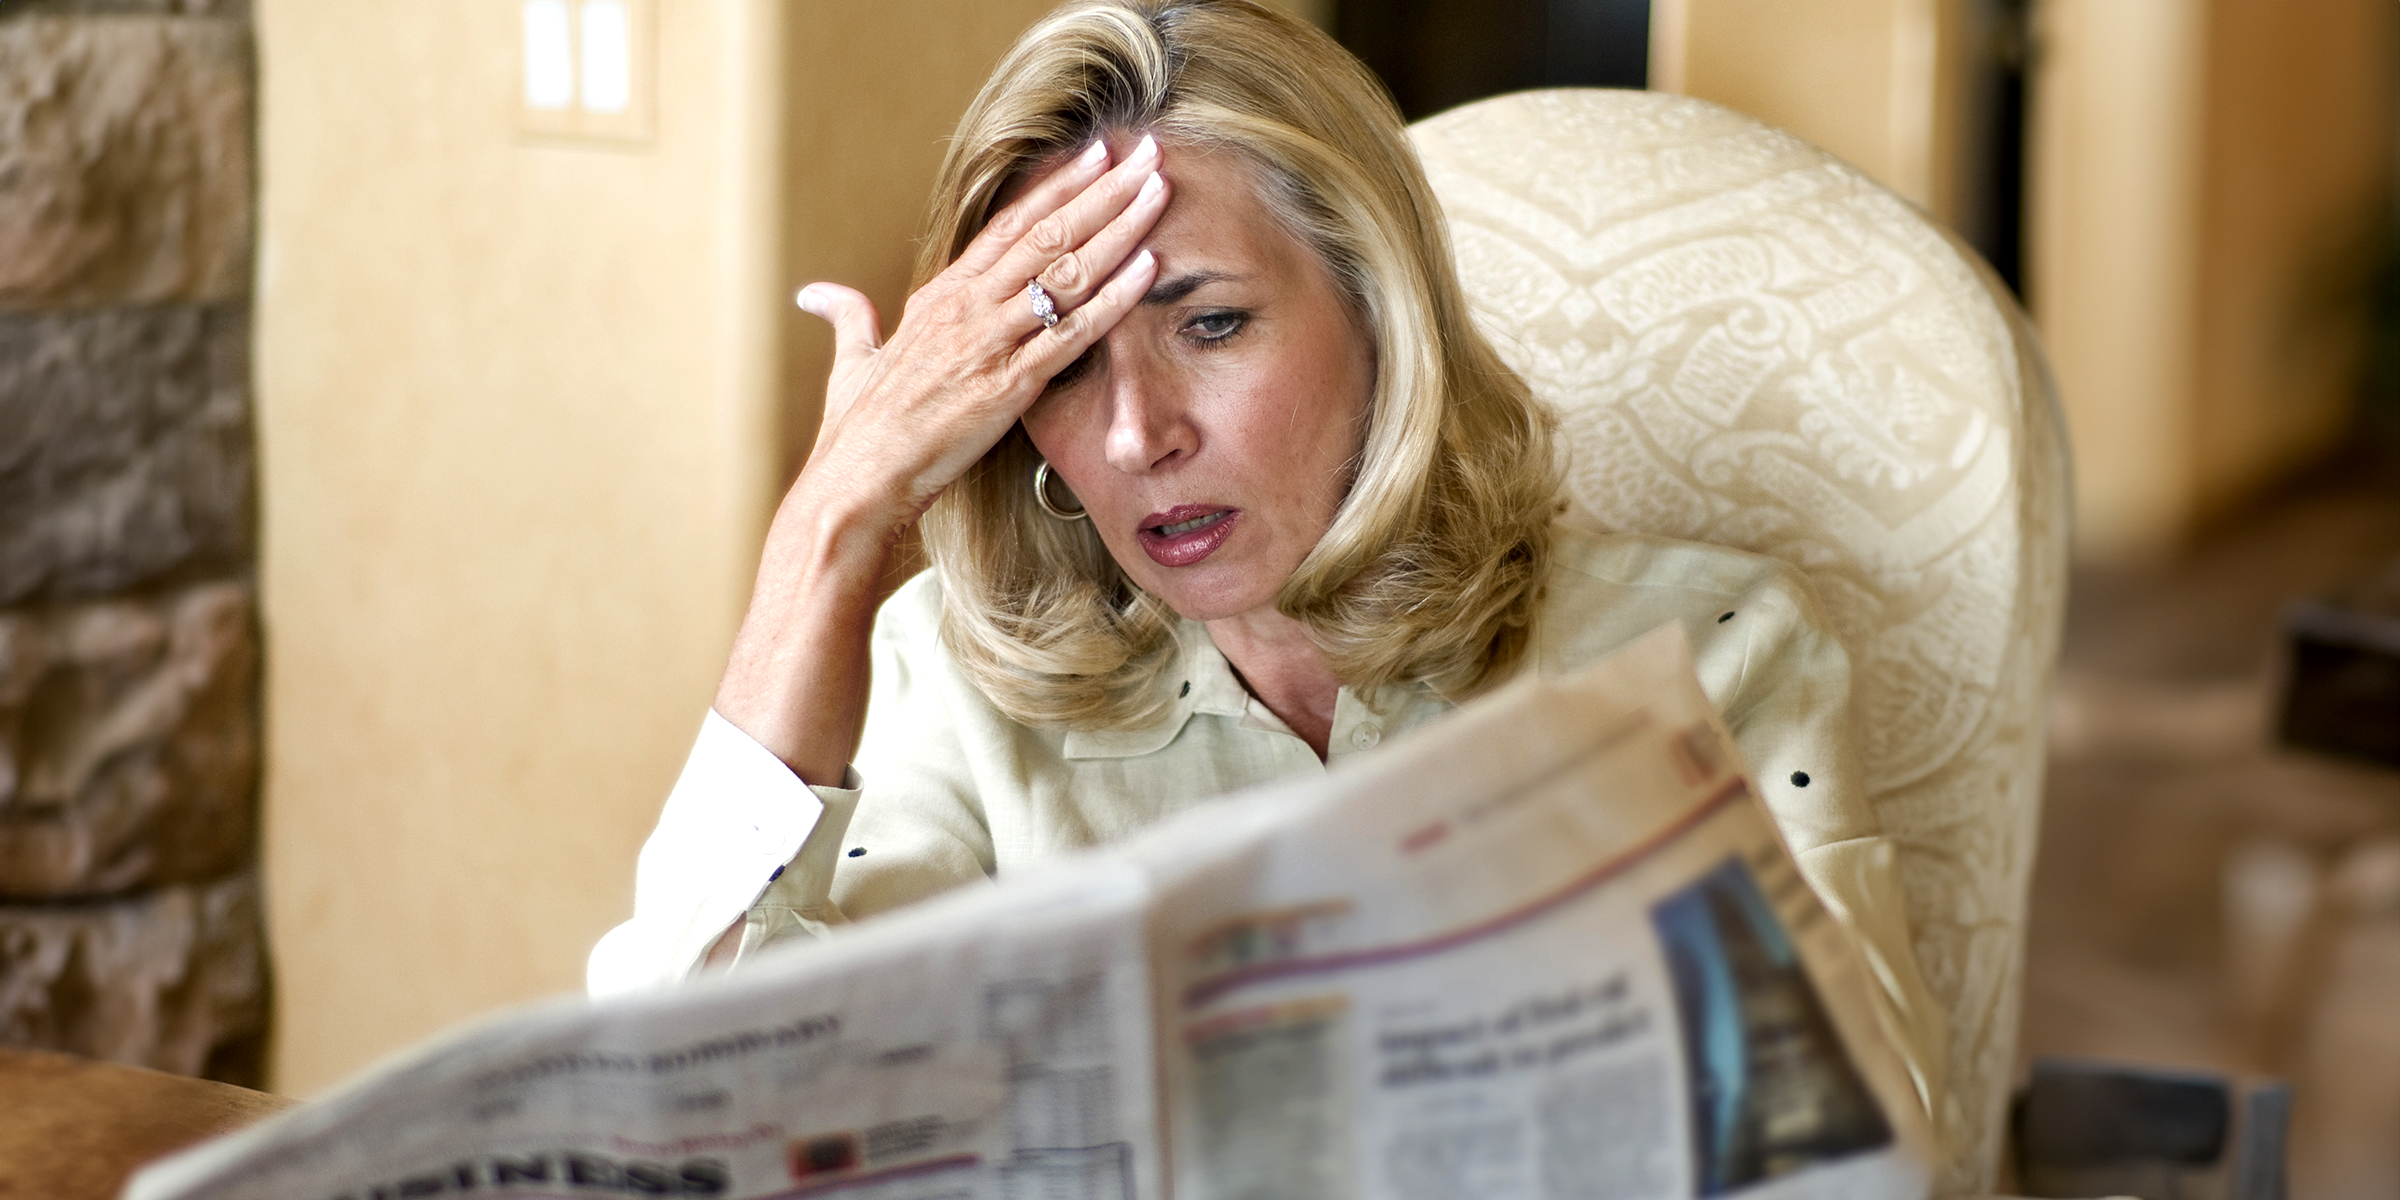 A shocked woman reading a newspaper | Source: Shutterstock